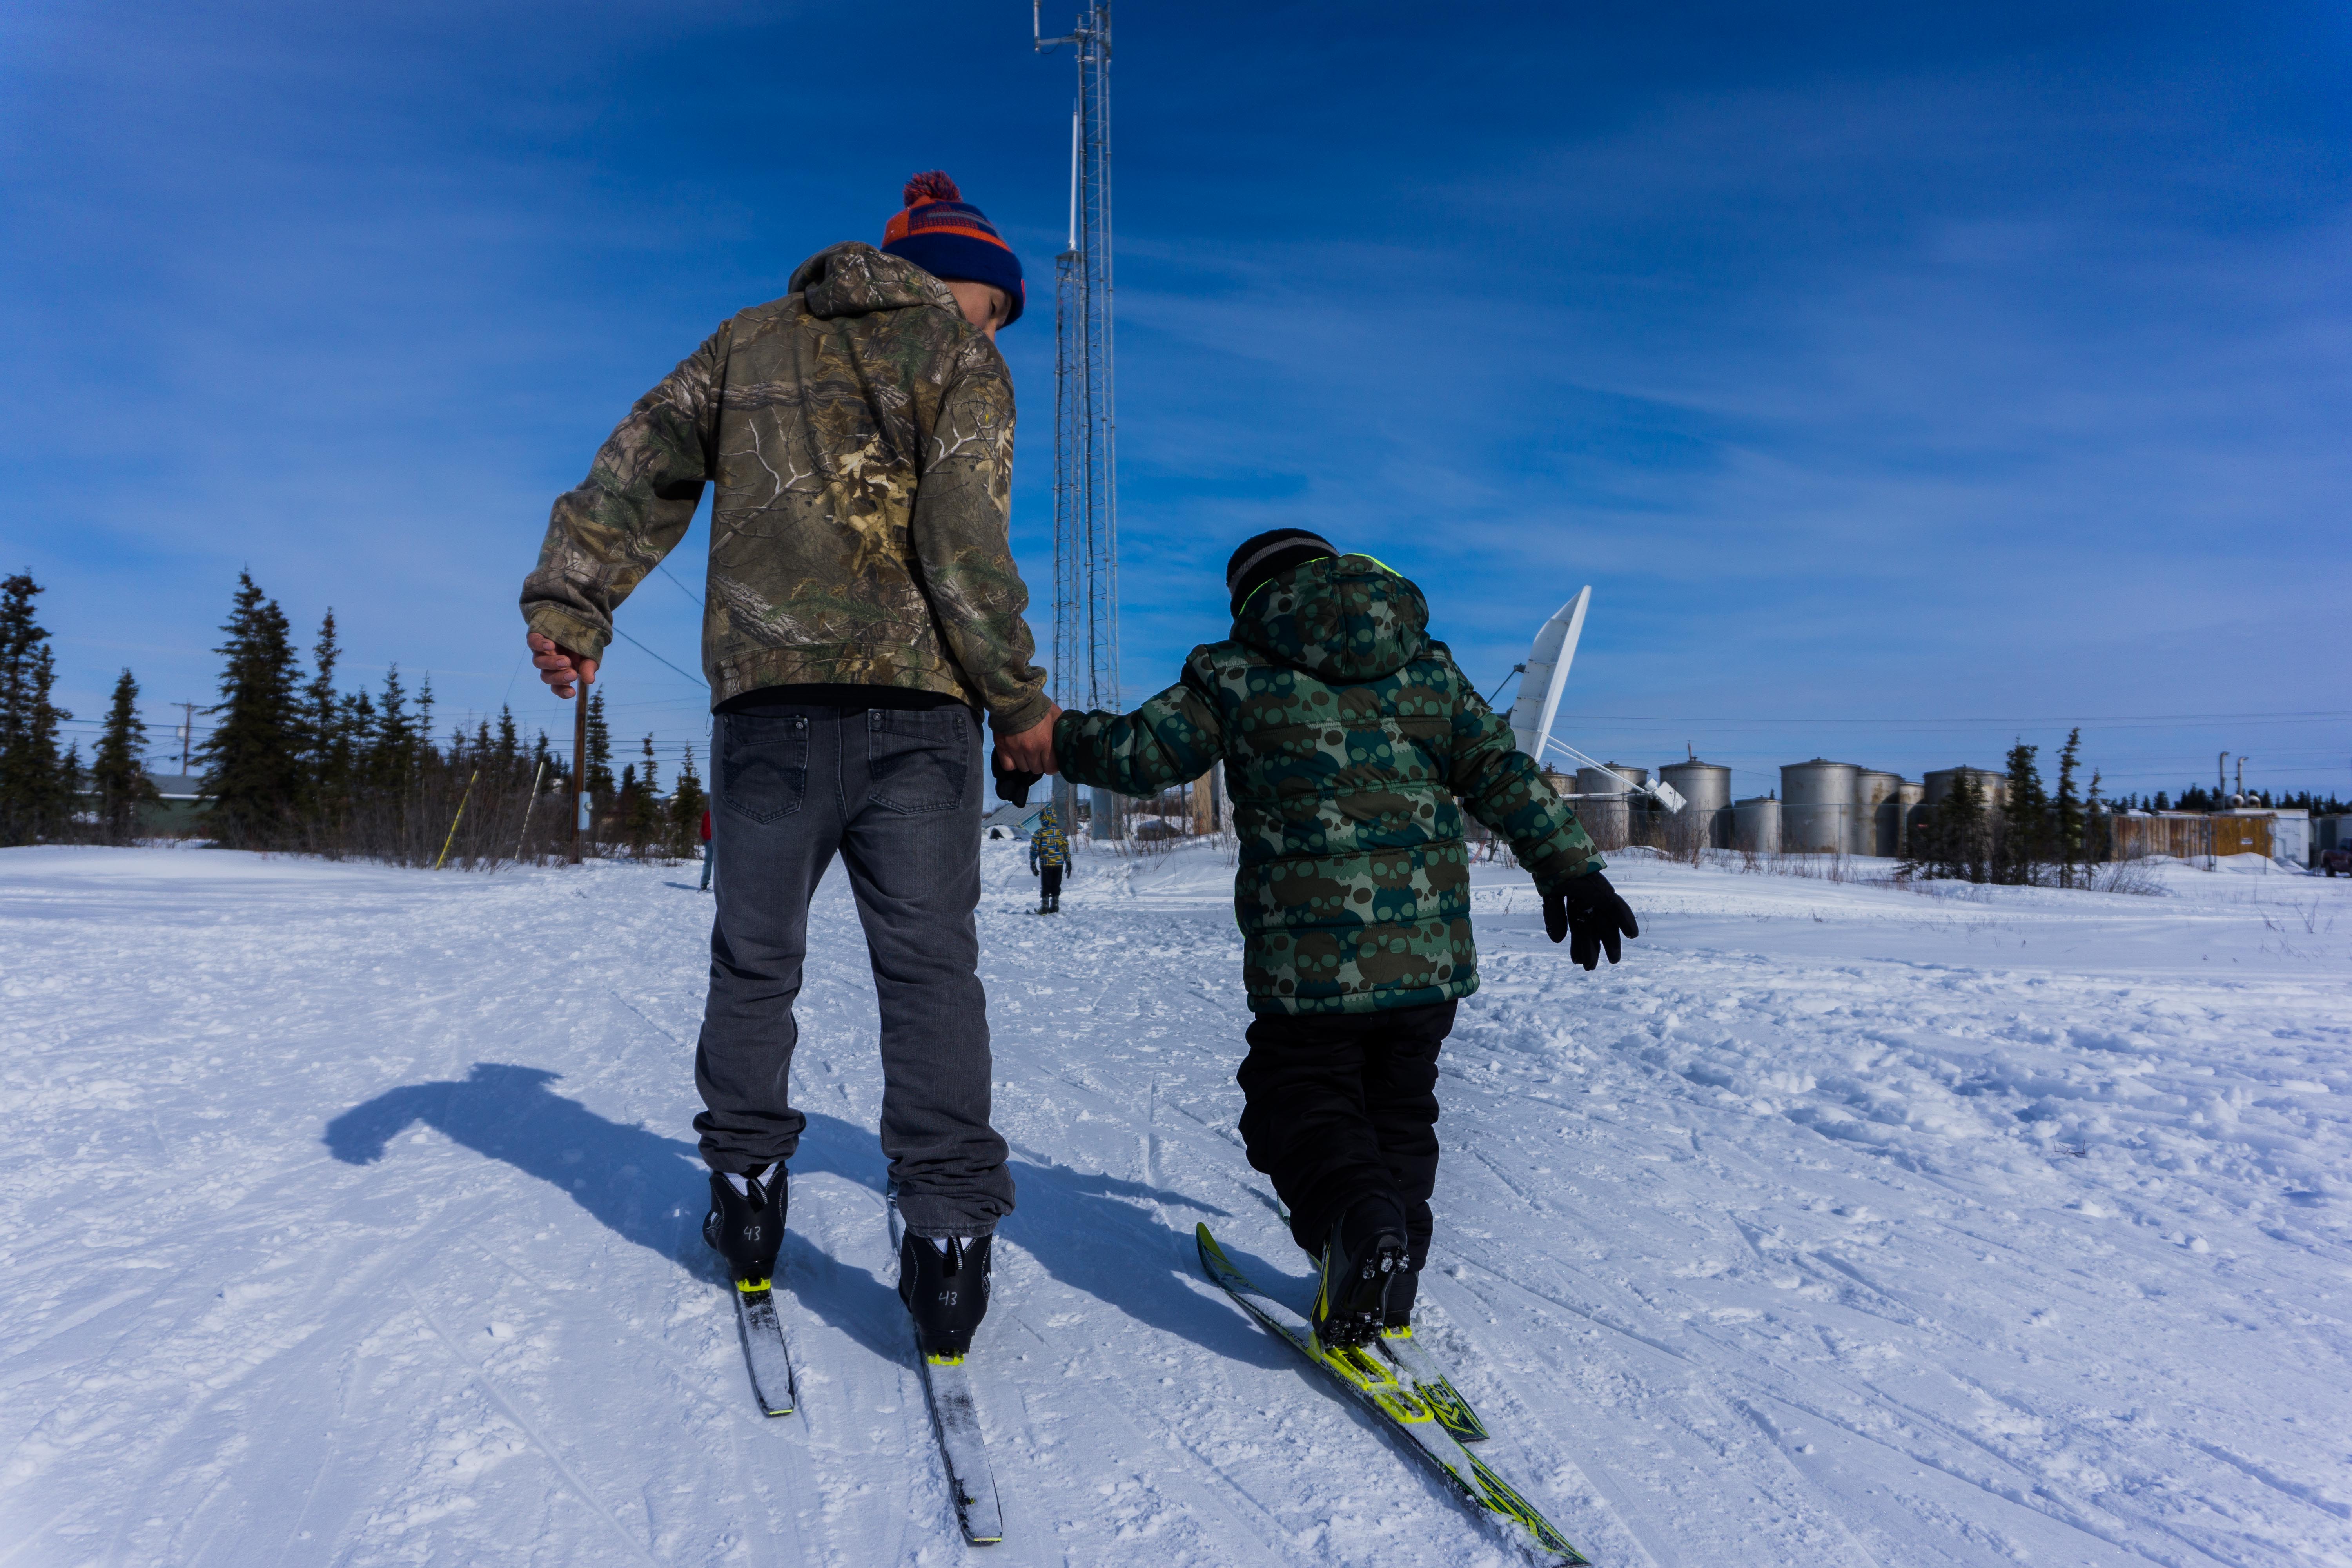 Learning While Teaching Skiing with NANANordic in Northwest Alaska